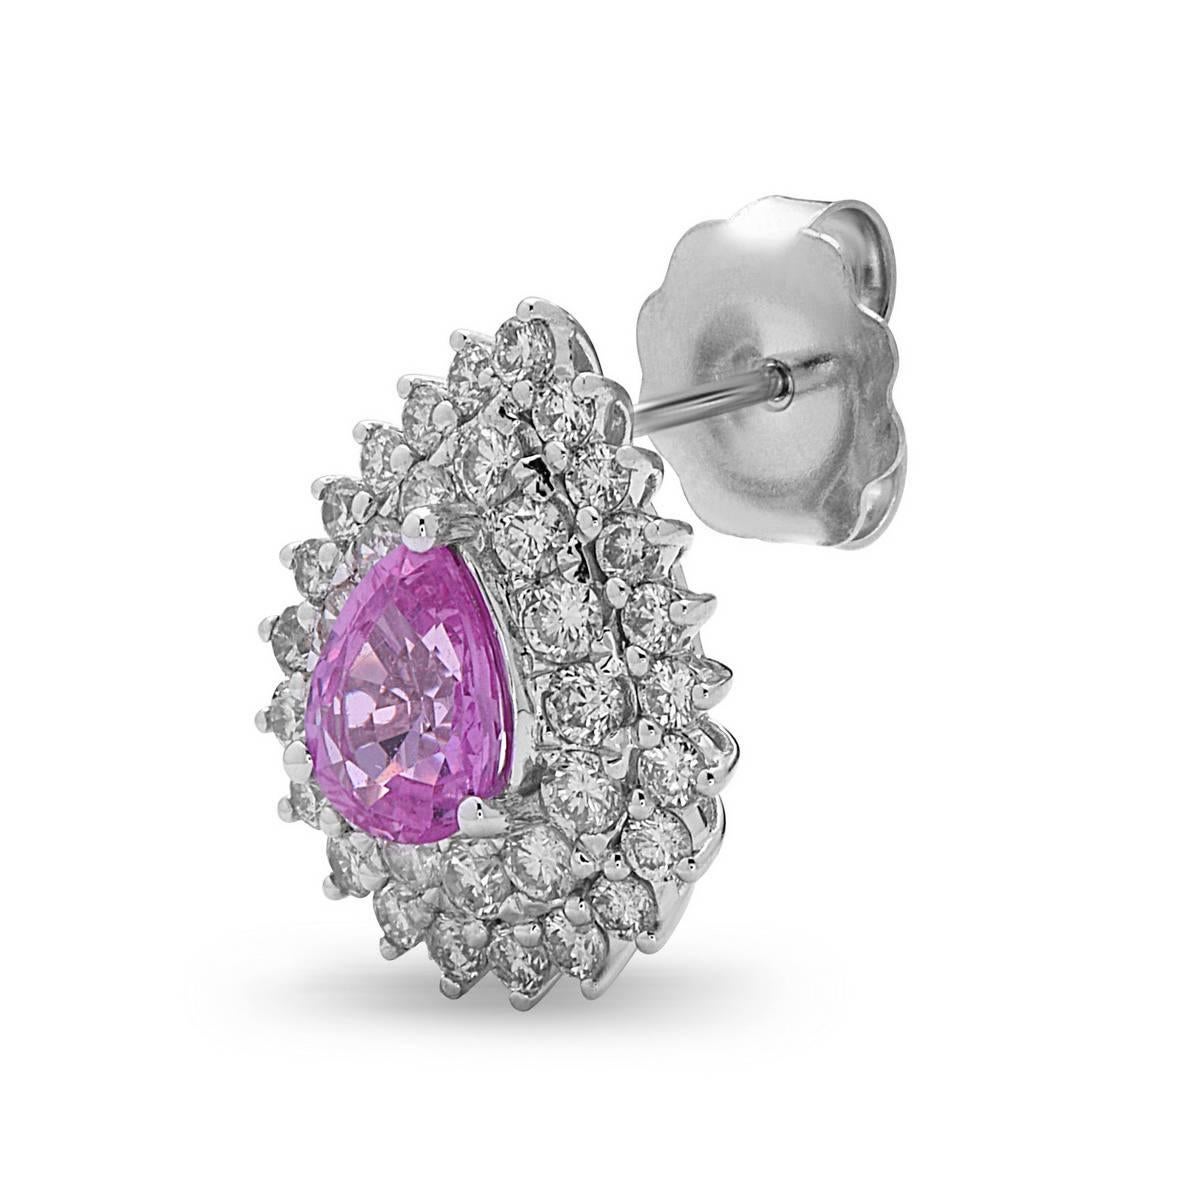 Mixed Cut Exquisite Pink Sapphire Stud Earrings With Diamonds Made In 18k White Gold For Sale